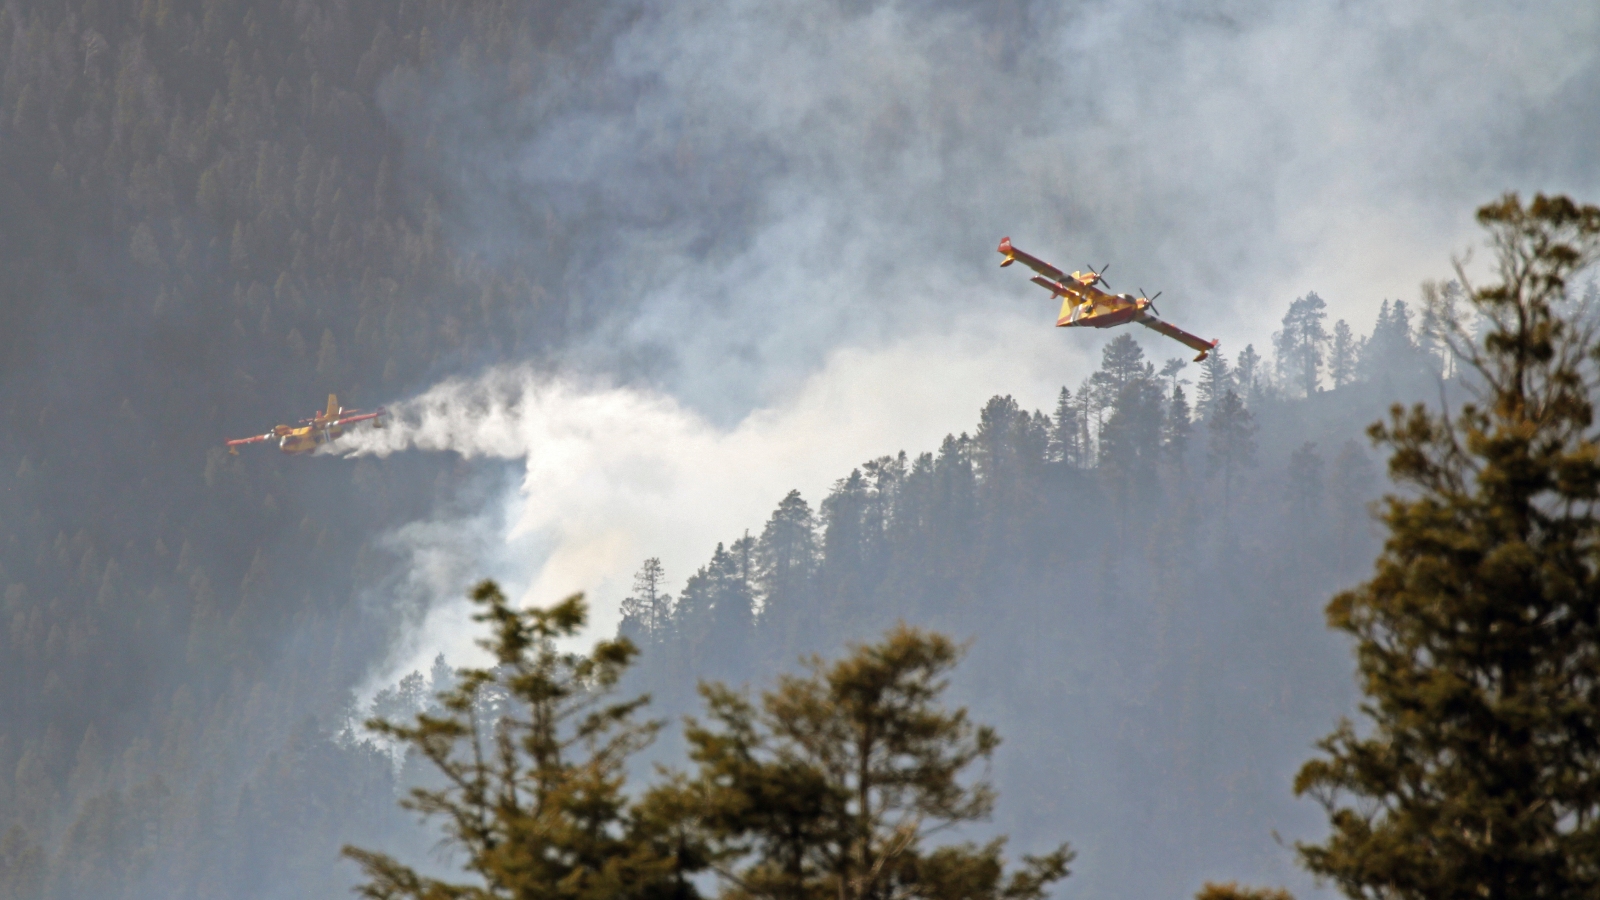 Aircraft fly over a smoky, hilly forest.